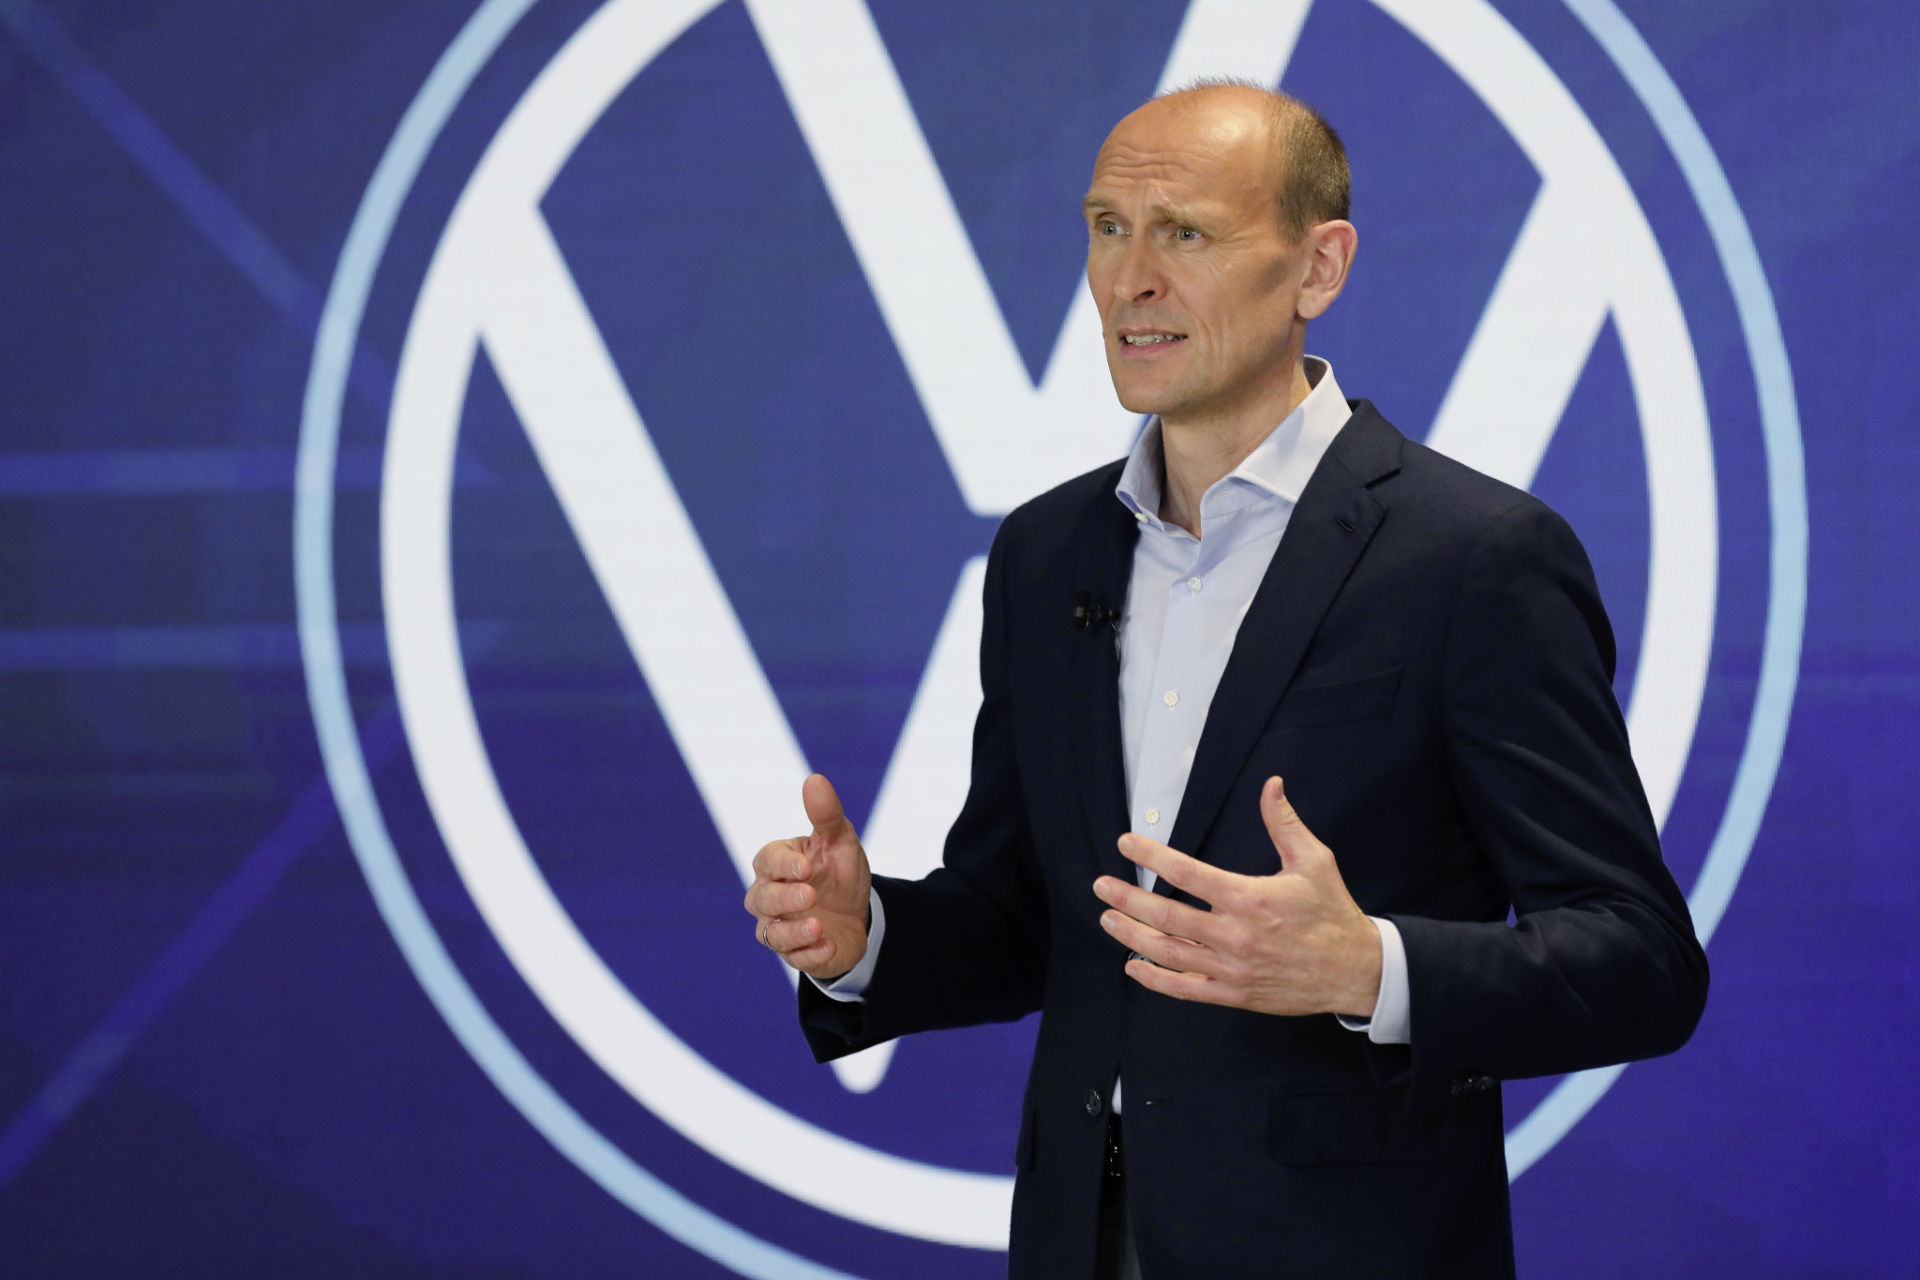 VW Accelerating Transformation Into Software-Driven Mobility Provider